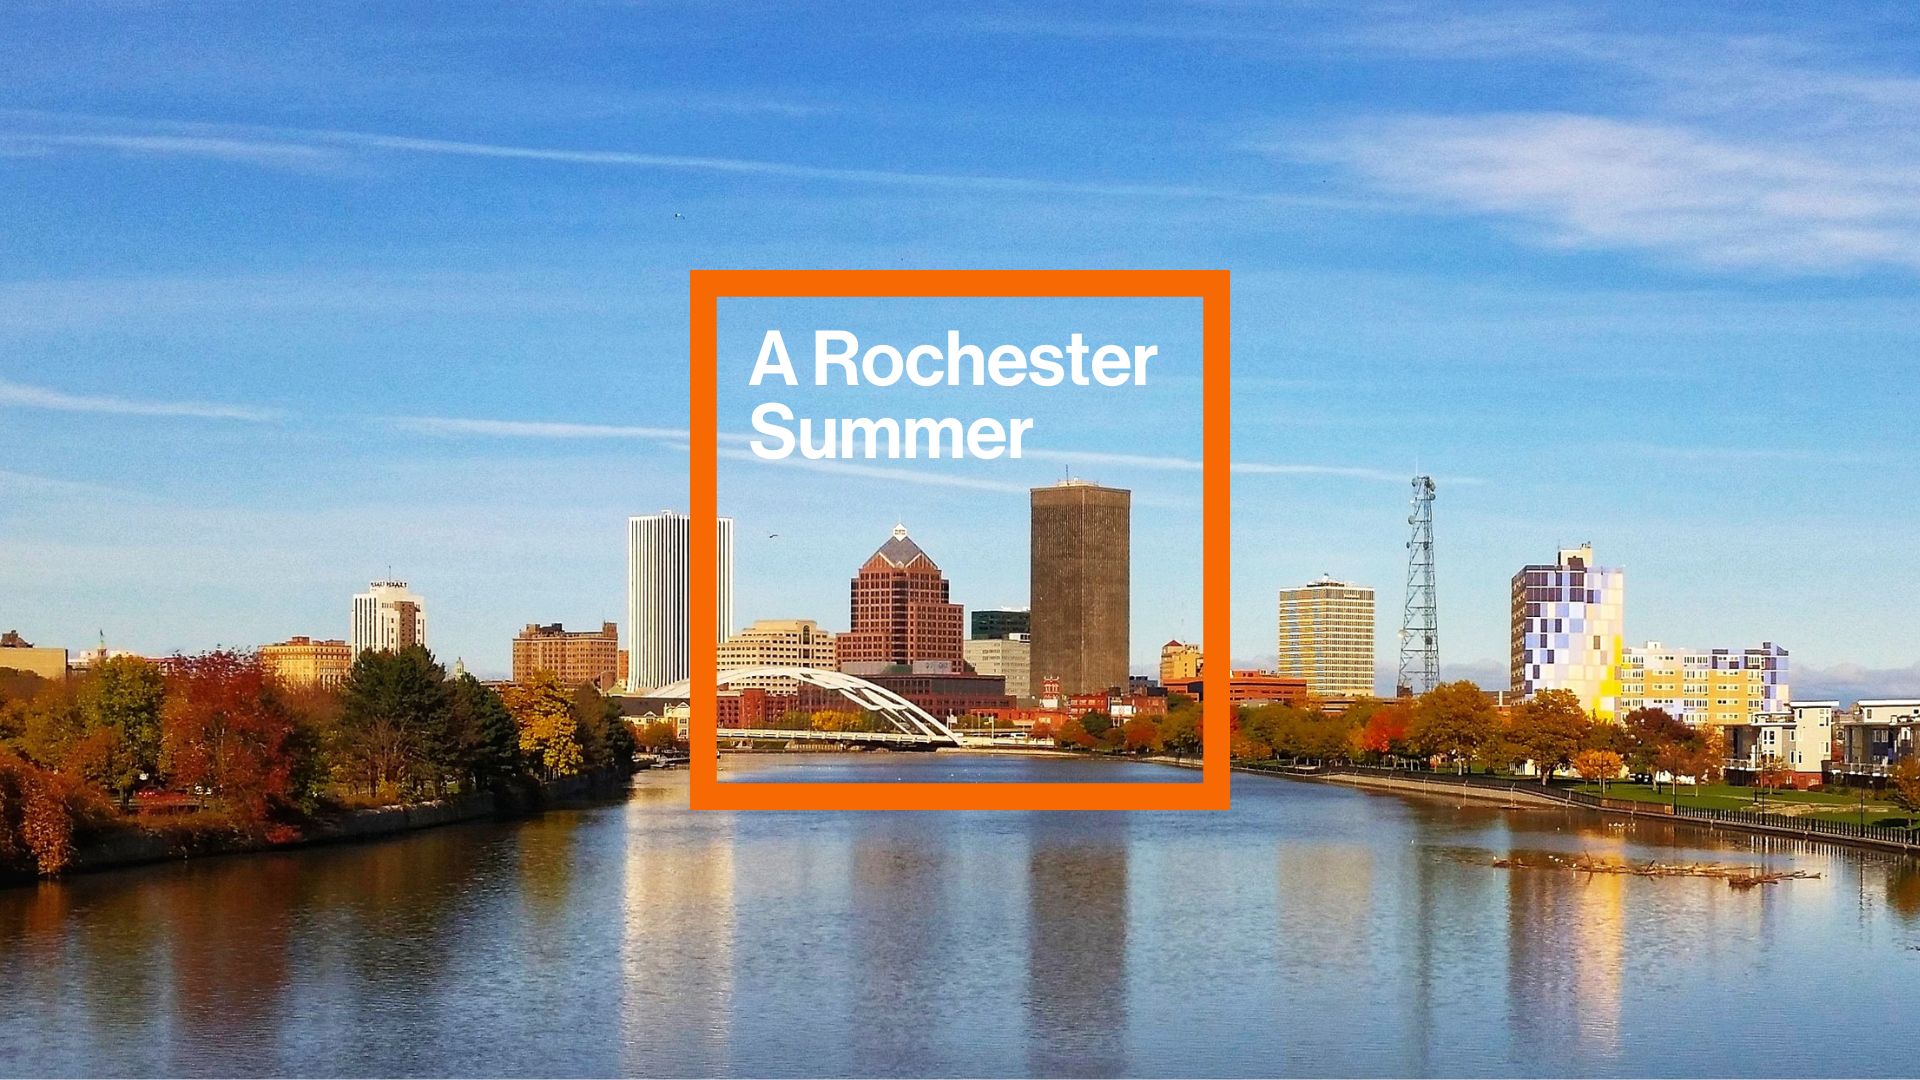 a photo of rochester new york with text that says a rochester summer